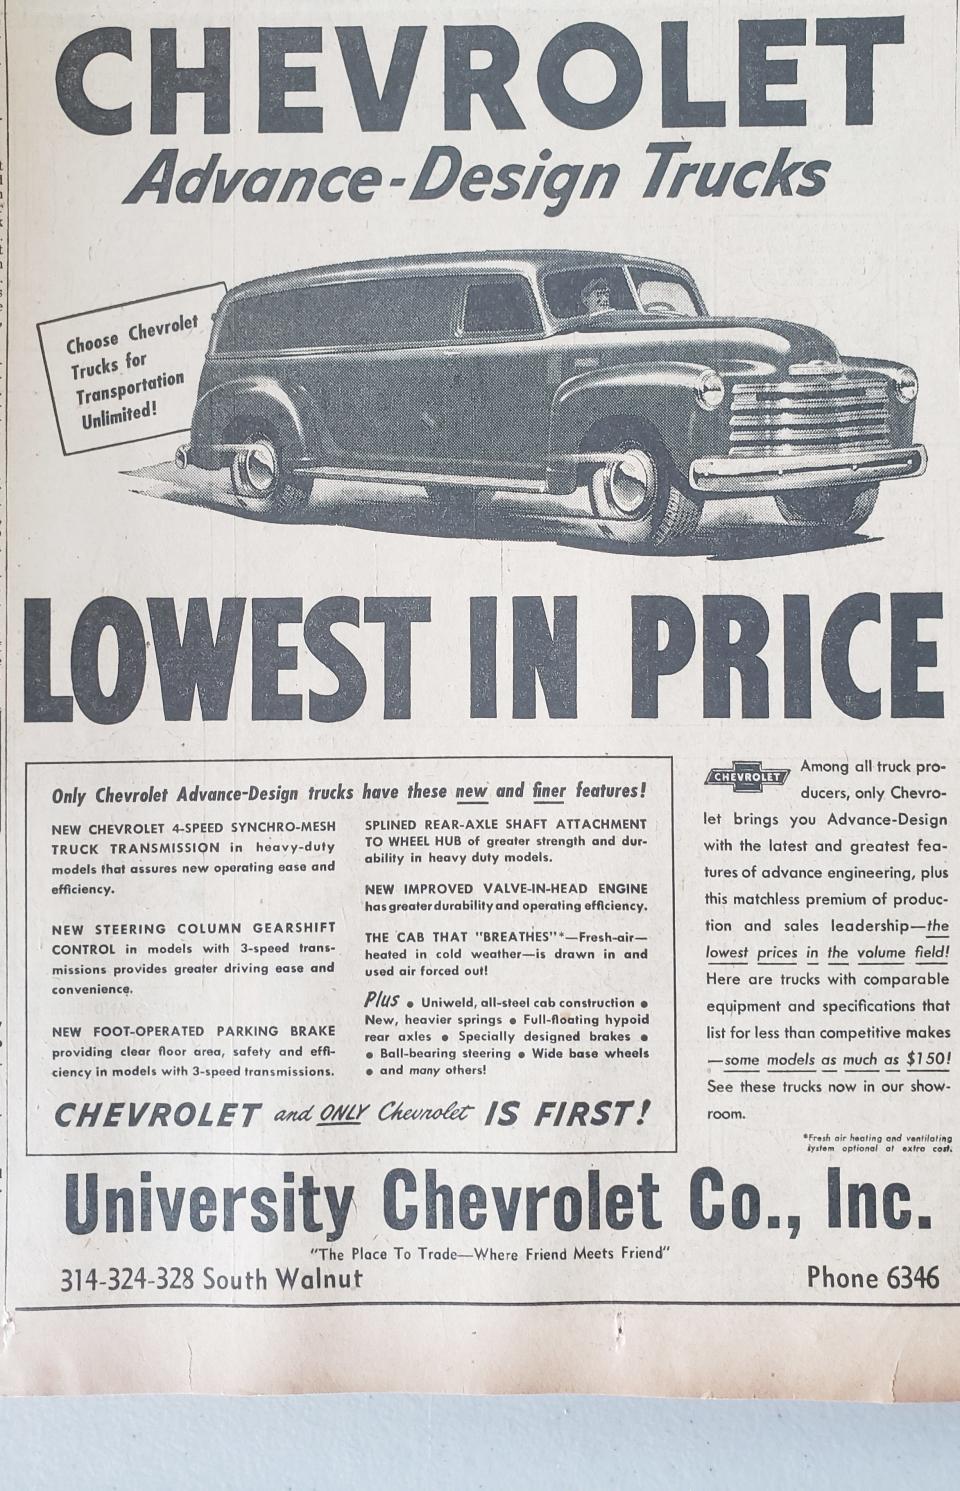 Check out this "Lowest in Price" Chevy.